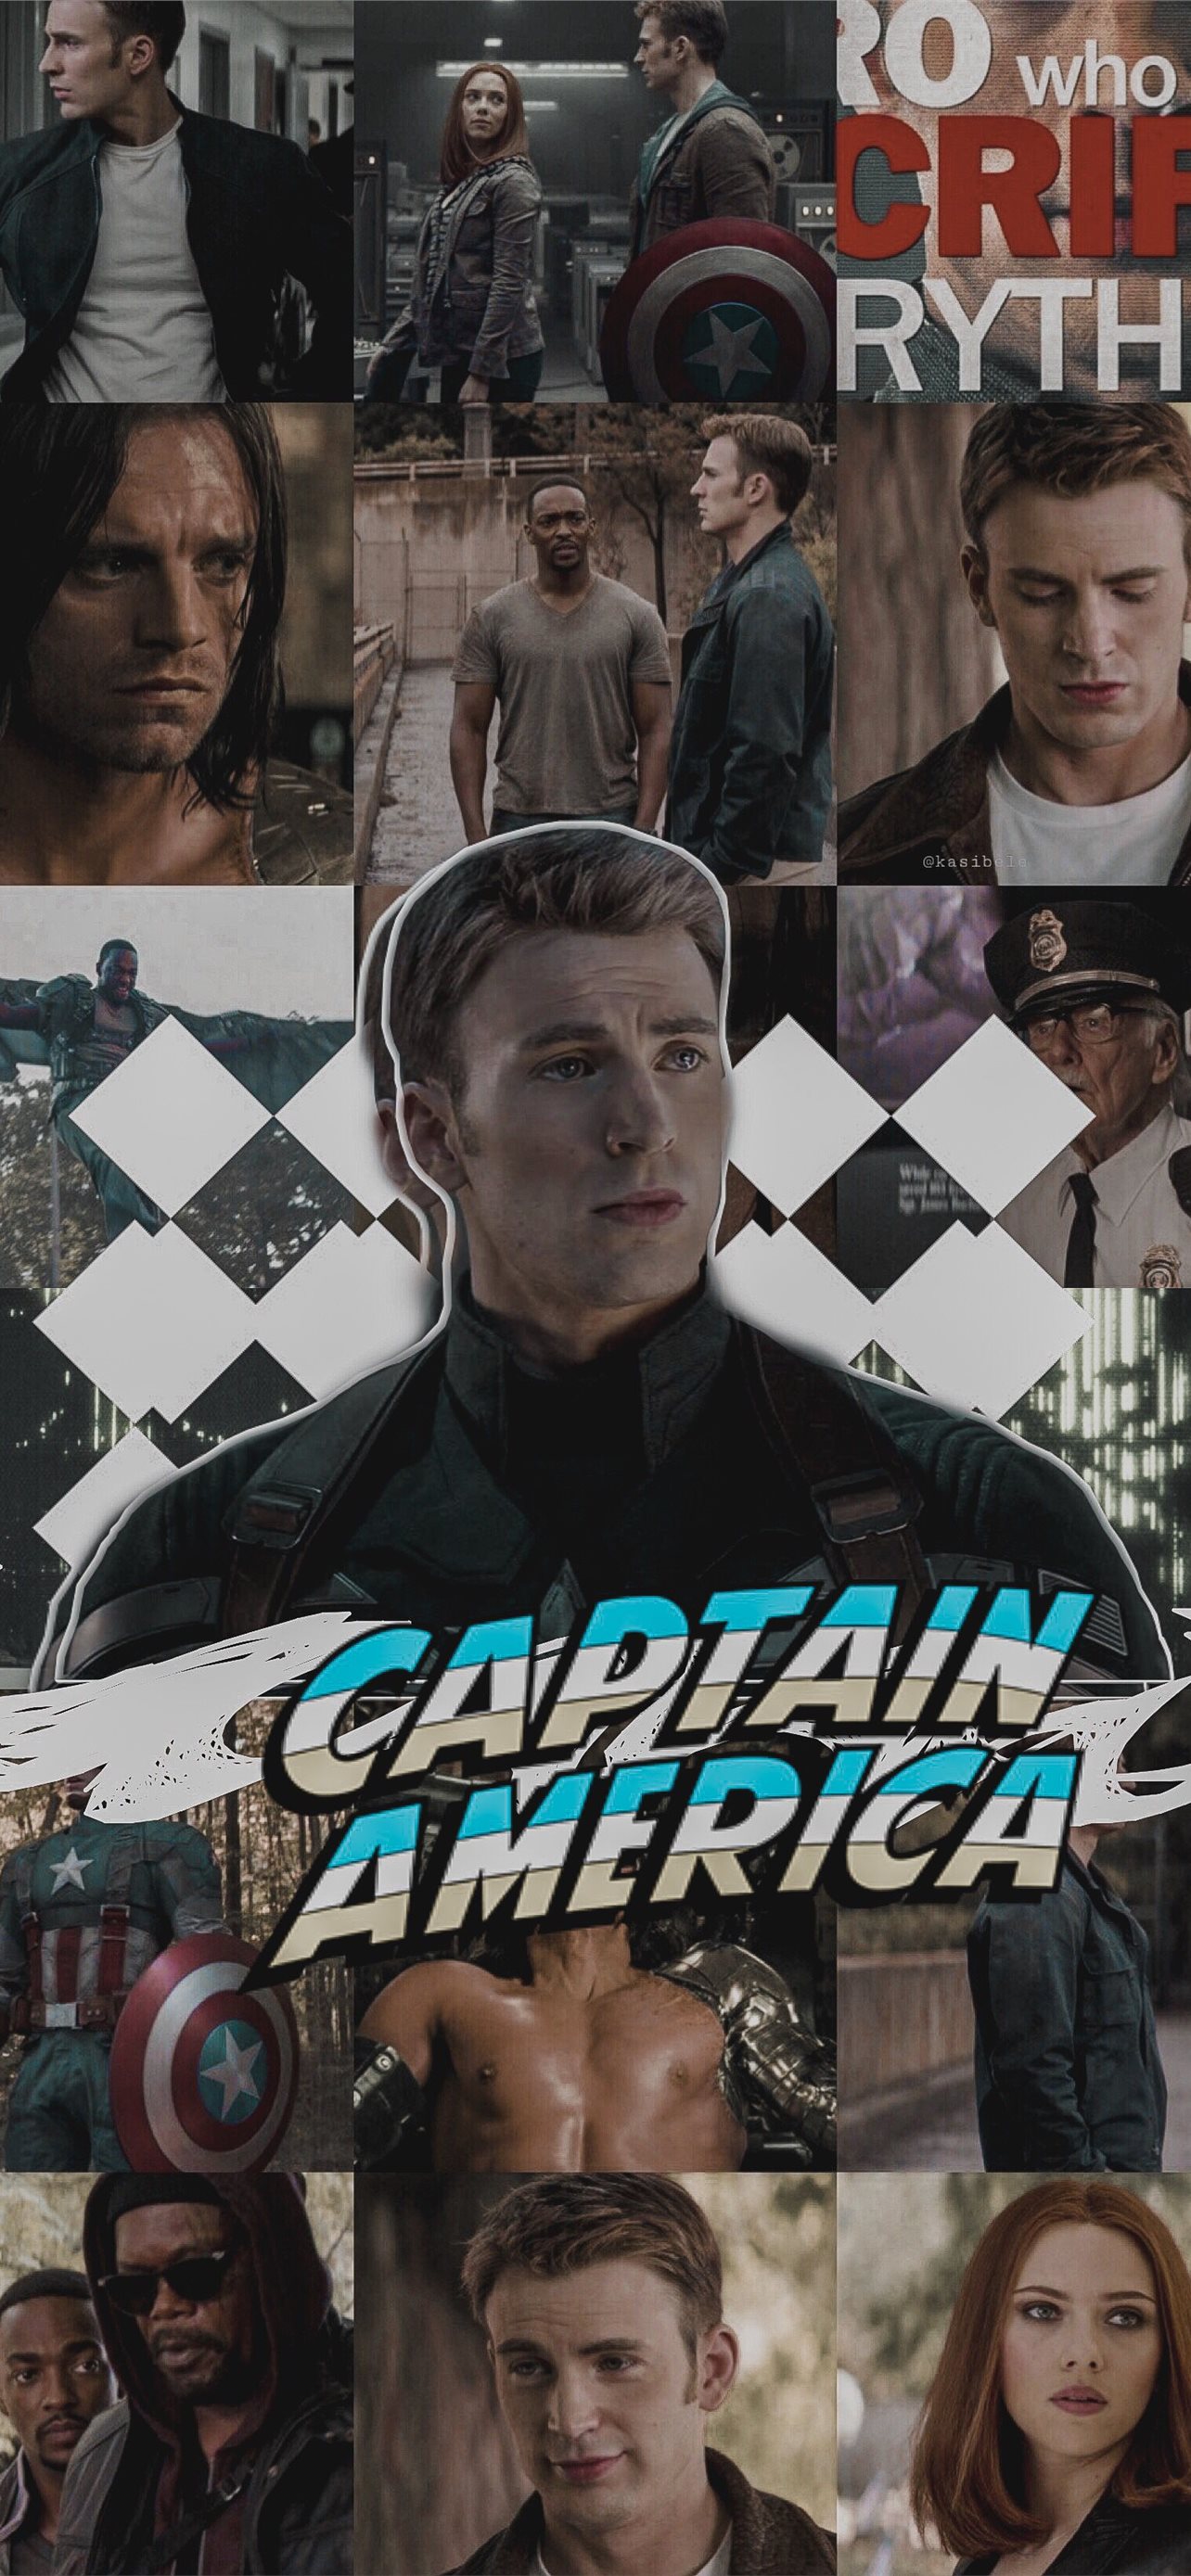 Captain America Wallpapers iPhone 6S by lirking20 on DeviantArt